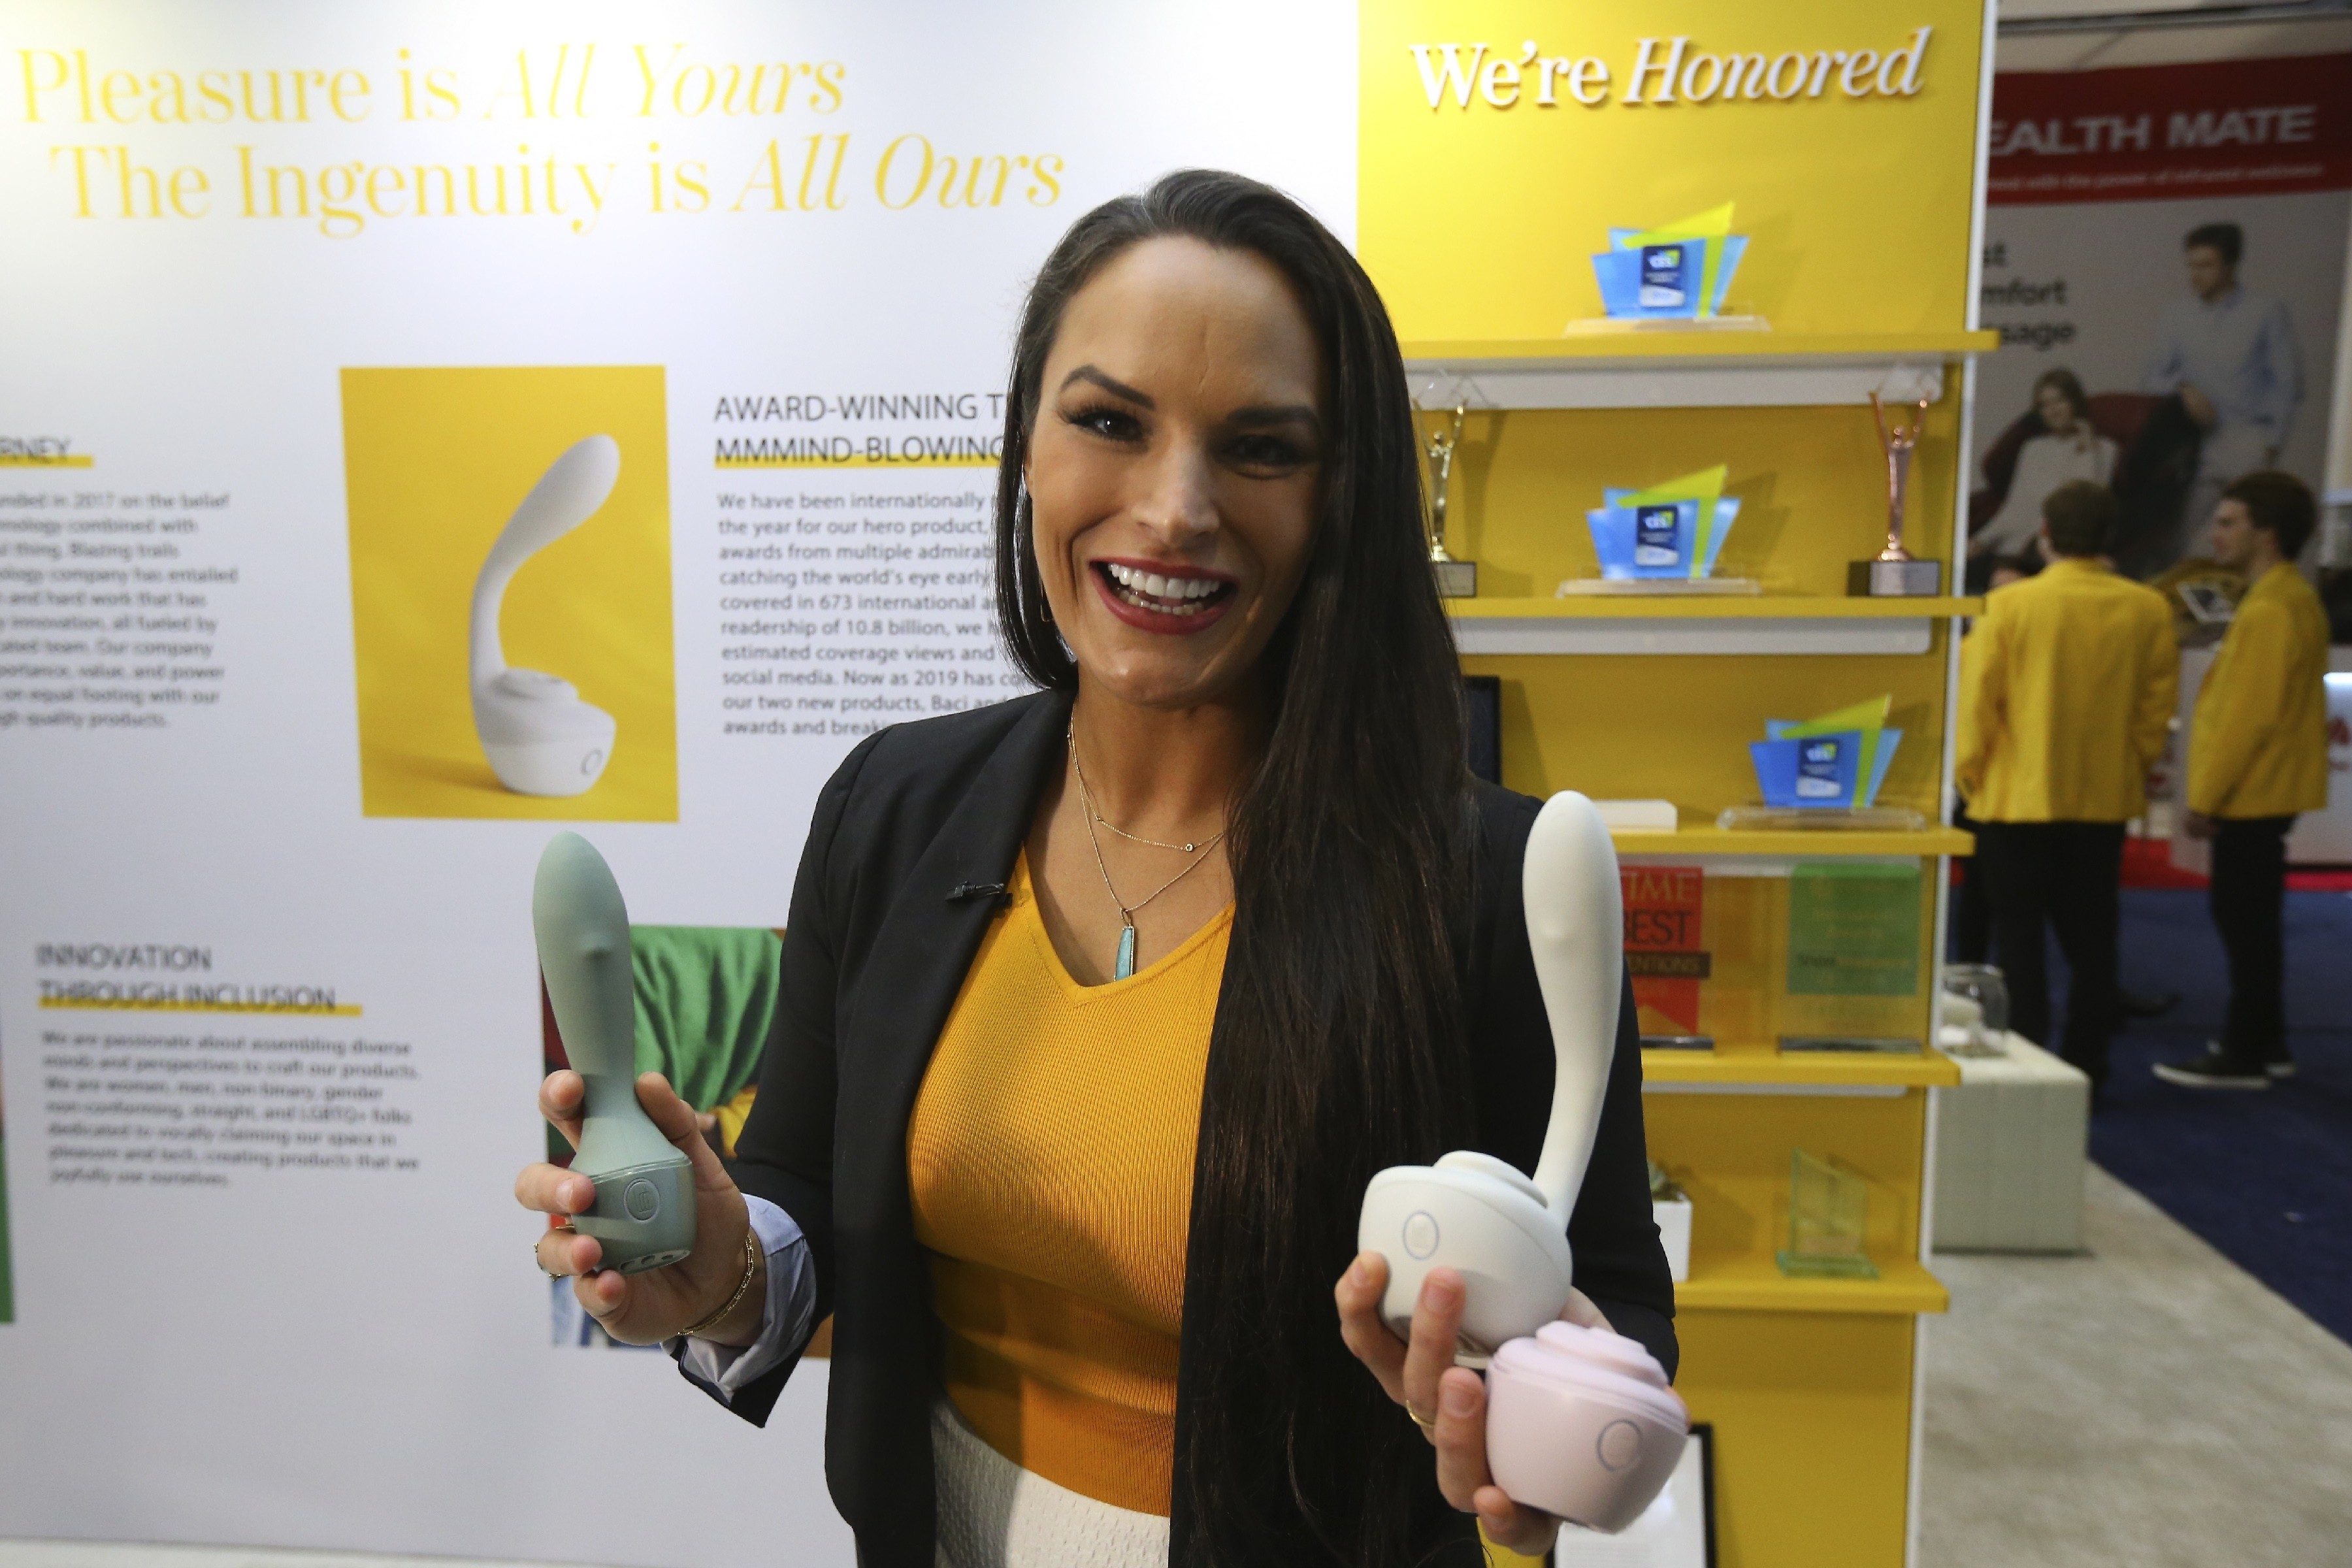 Lora Haddock DiCarlo, founder and CEO of Lora DiCarlo, holding several of her robotic massager devices at CES 2020. Photo: AP